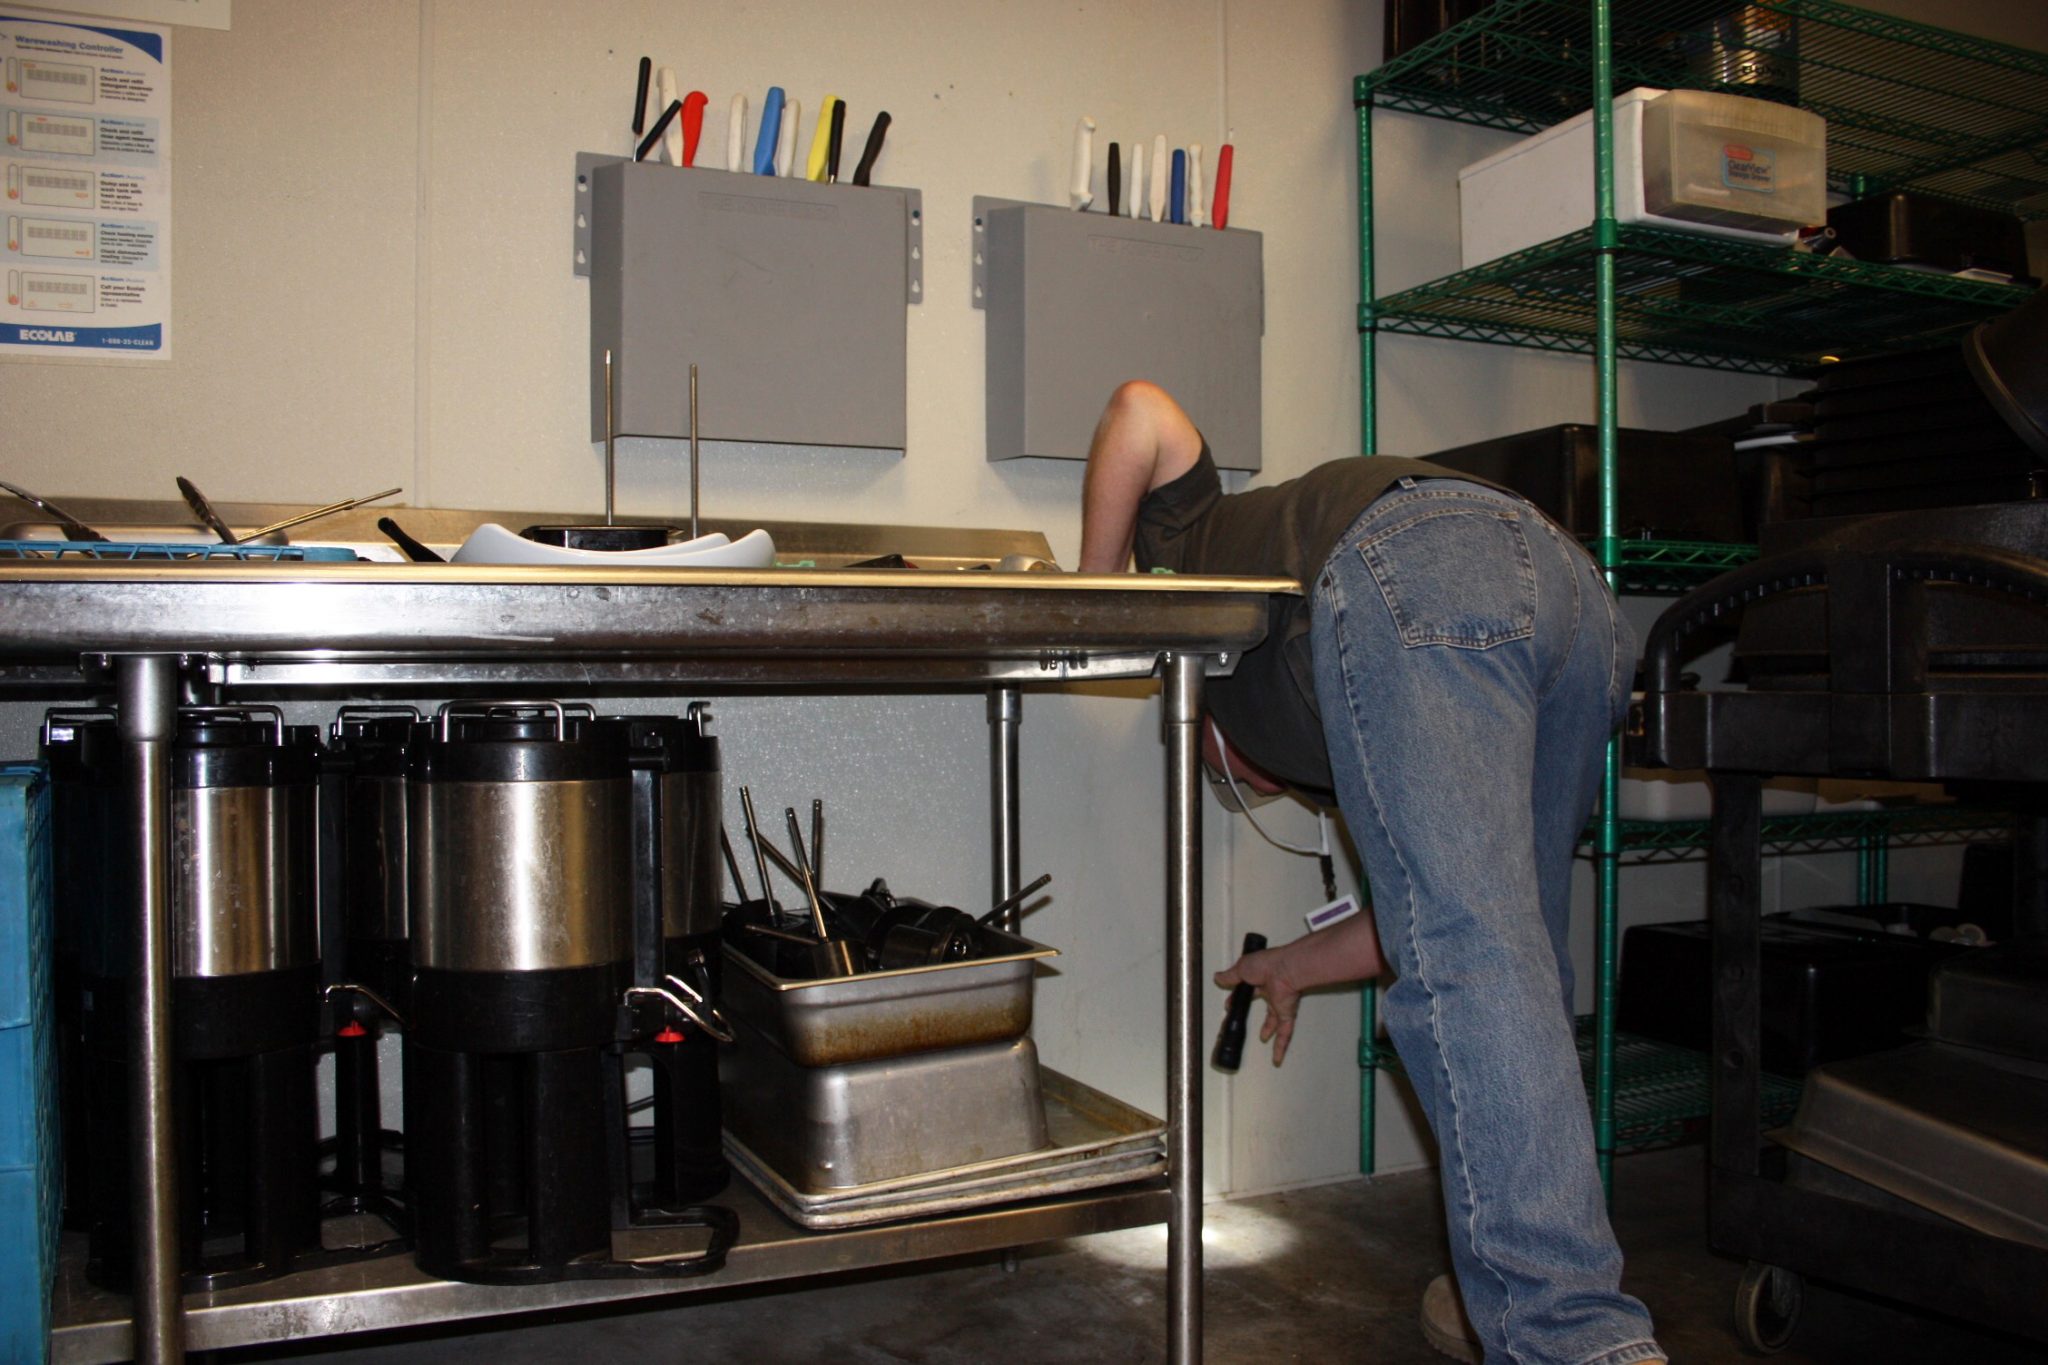 A man performing a kitchen Inspection for Pests in a public kitchen.